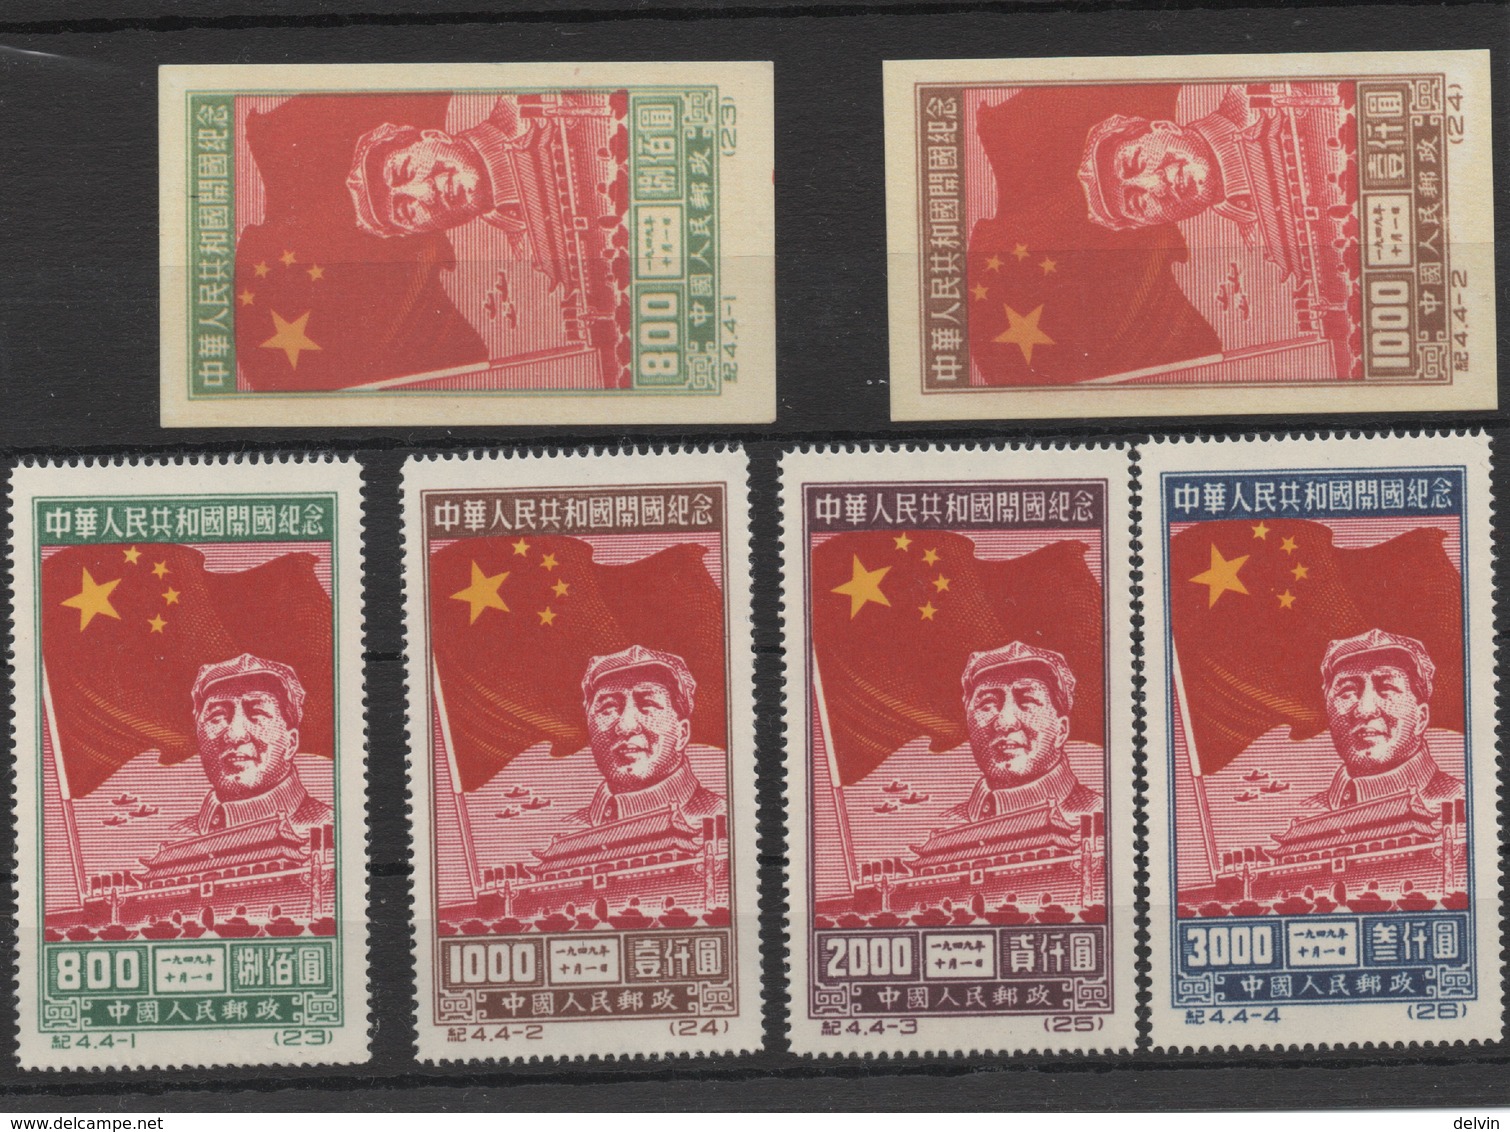 China - 1950 Mao Tze Tung And Flag Complete Set Of 6 Stamps Perf.& Imperf. Reprint Of The Era. New No Gum (see Photo) - Ristampe Ufficiali